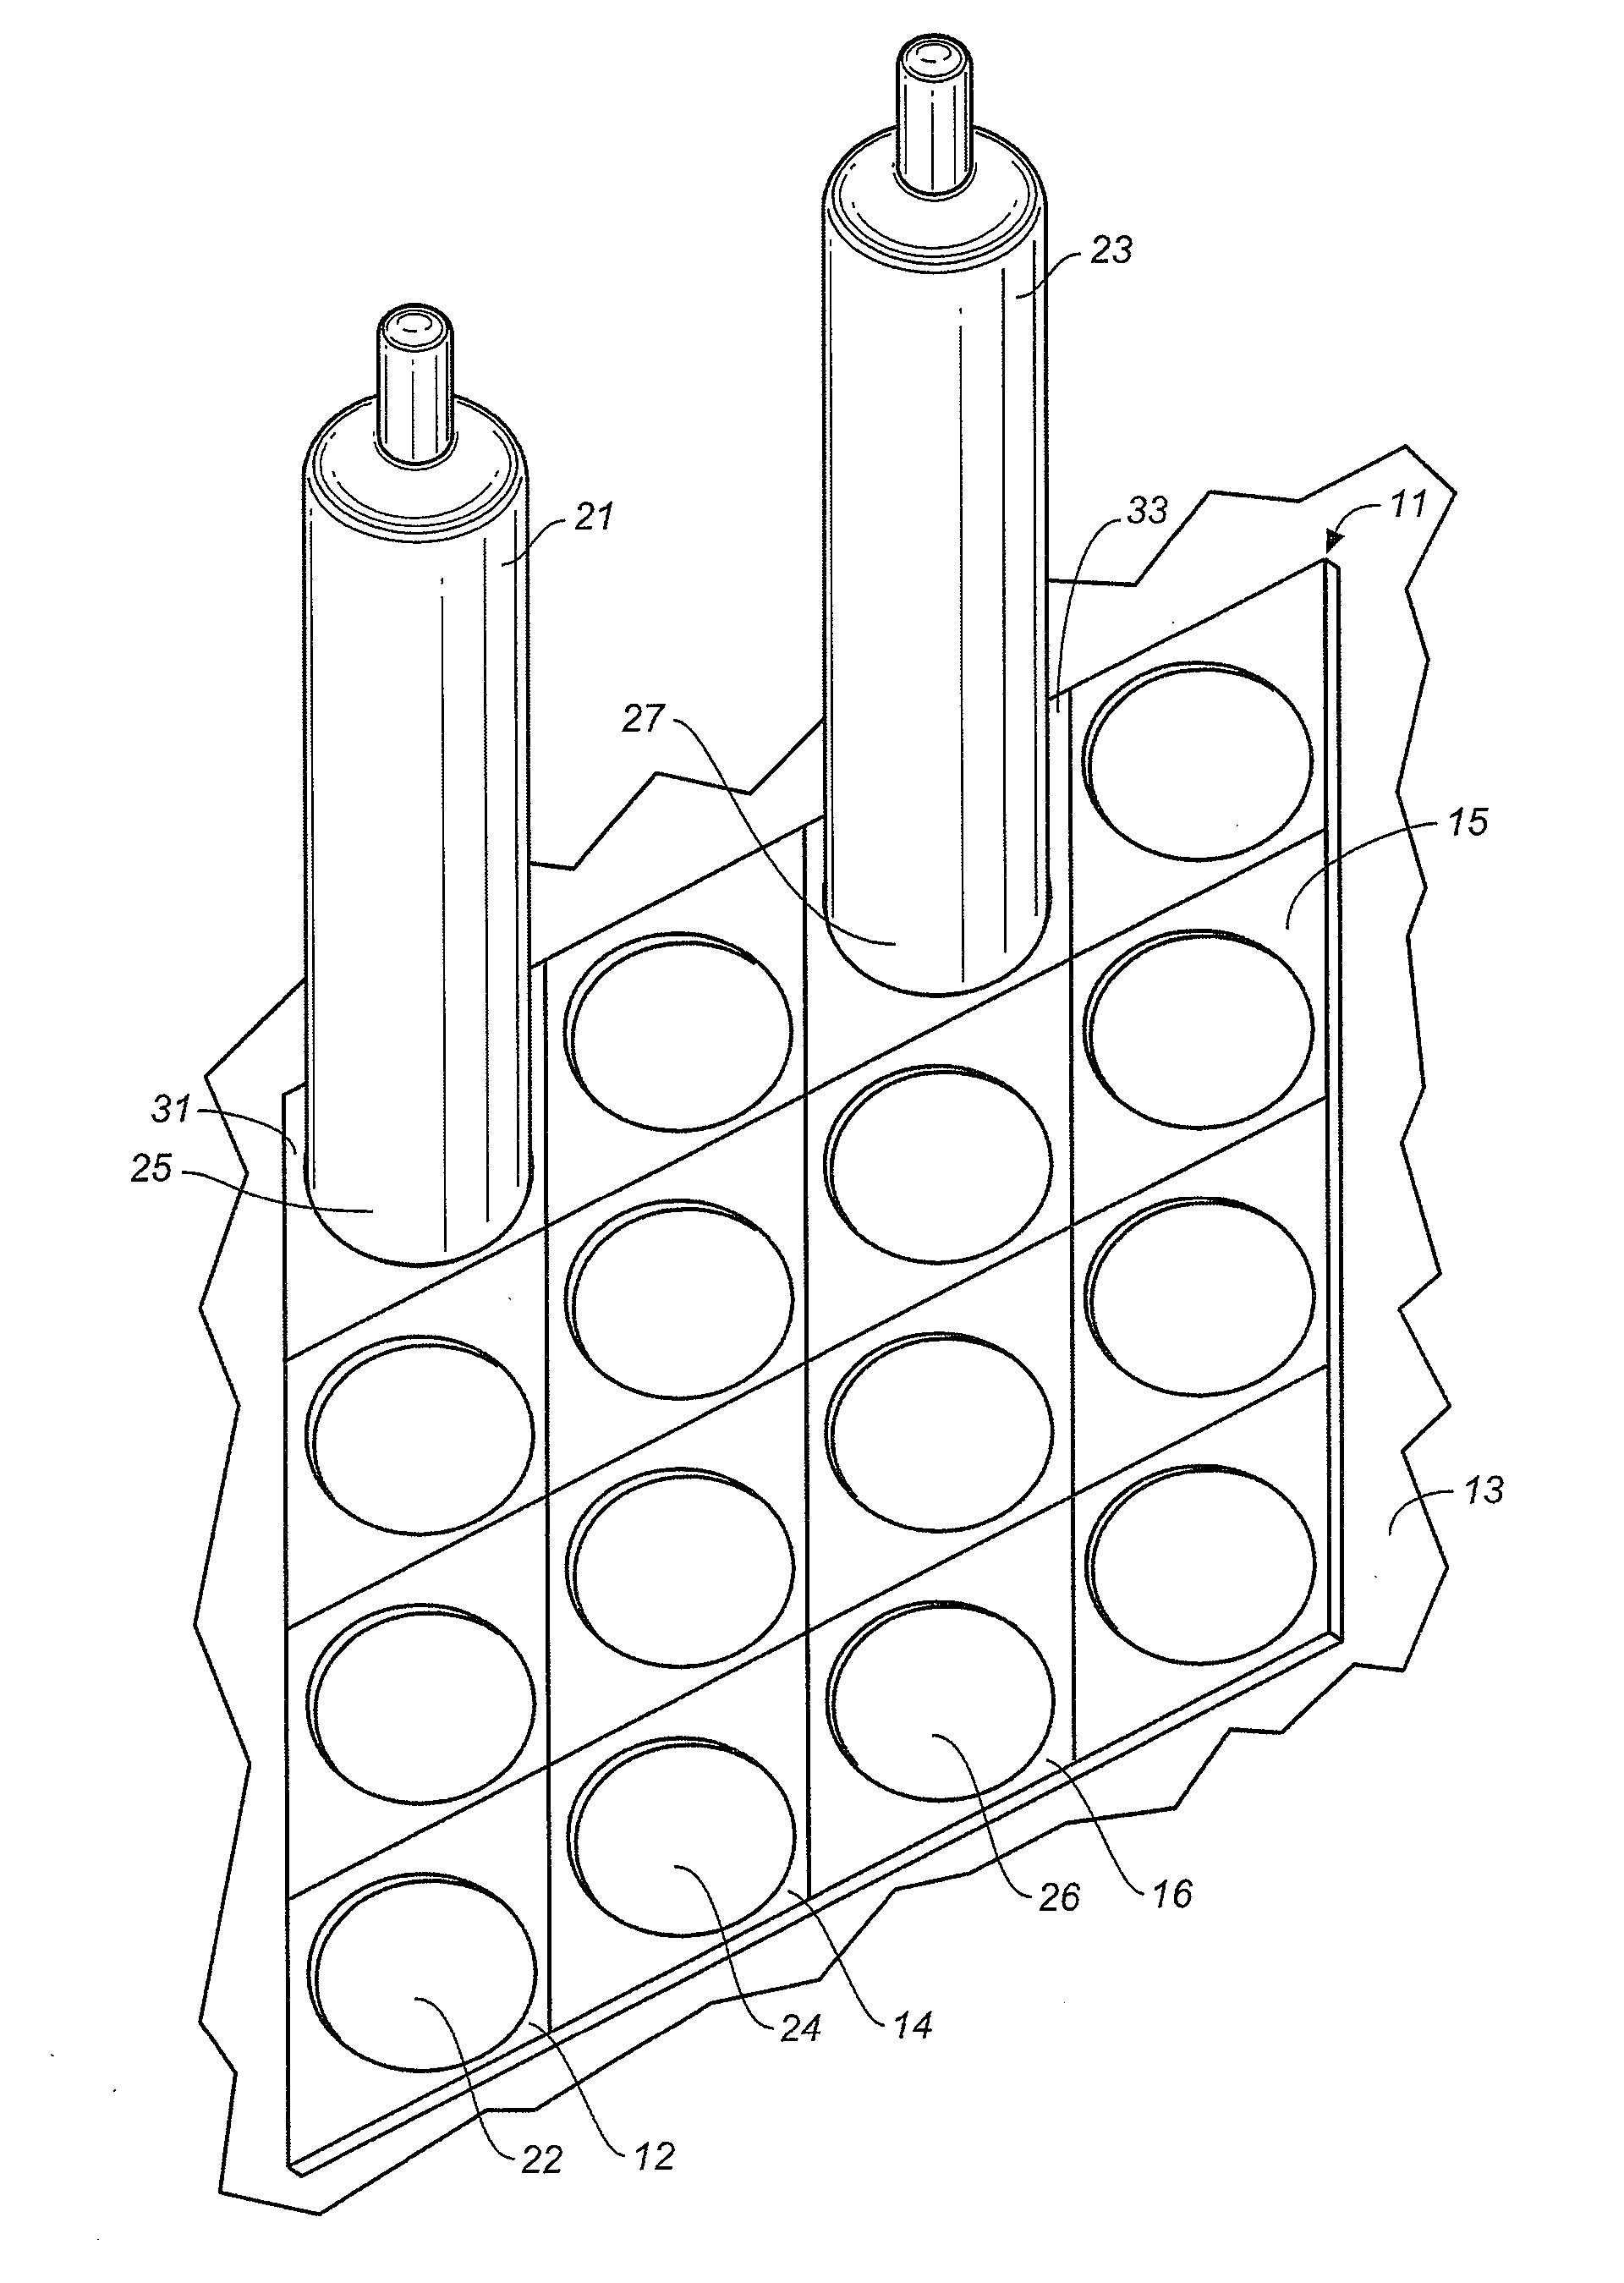 Tank sensor array for inventory signaling in a tank management system